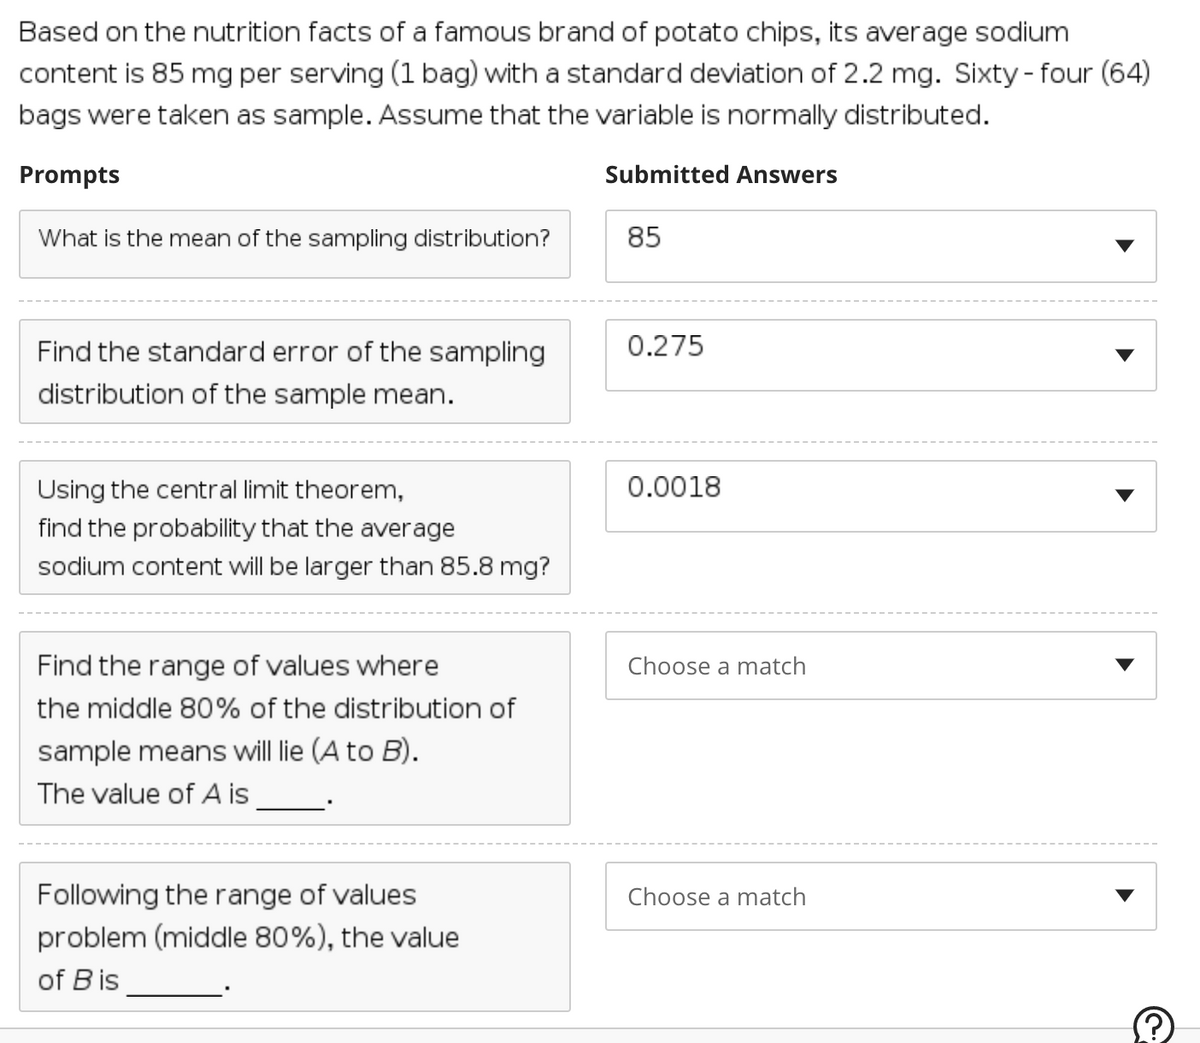 Based on the nutrition facts of a famous brand of potato chips, its average sodium
content is 85 mg per serving (1 bag) with a standard deviation of 2.2 mg. Sixty-four (64)
bags were taken as sample. Assume that the variable is normally distributed.
Prompts
Submitted Answers
What is the mean of the sampling distribution?
85
Find the standard error of the sampling
0.275
distribution of the sample mean.
Using the central limit theorem,
0.0018
find the probability that the average
sodium content will be larger than 85.8 mg?
Find the range of values where
Choose a match
the middle 80% of the distribution of
sample means will lie (A to B).
The value of A is
Choose a match
Following the range of values
problem (middle 80%), the value
of Bis